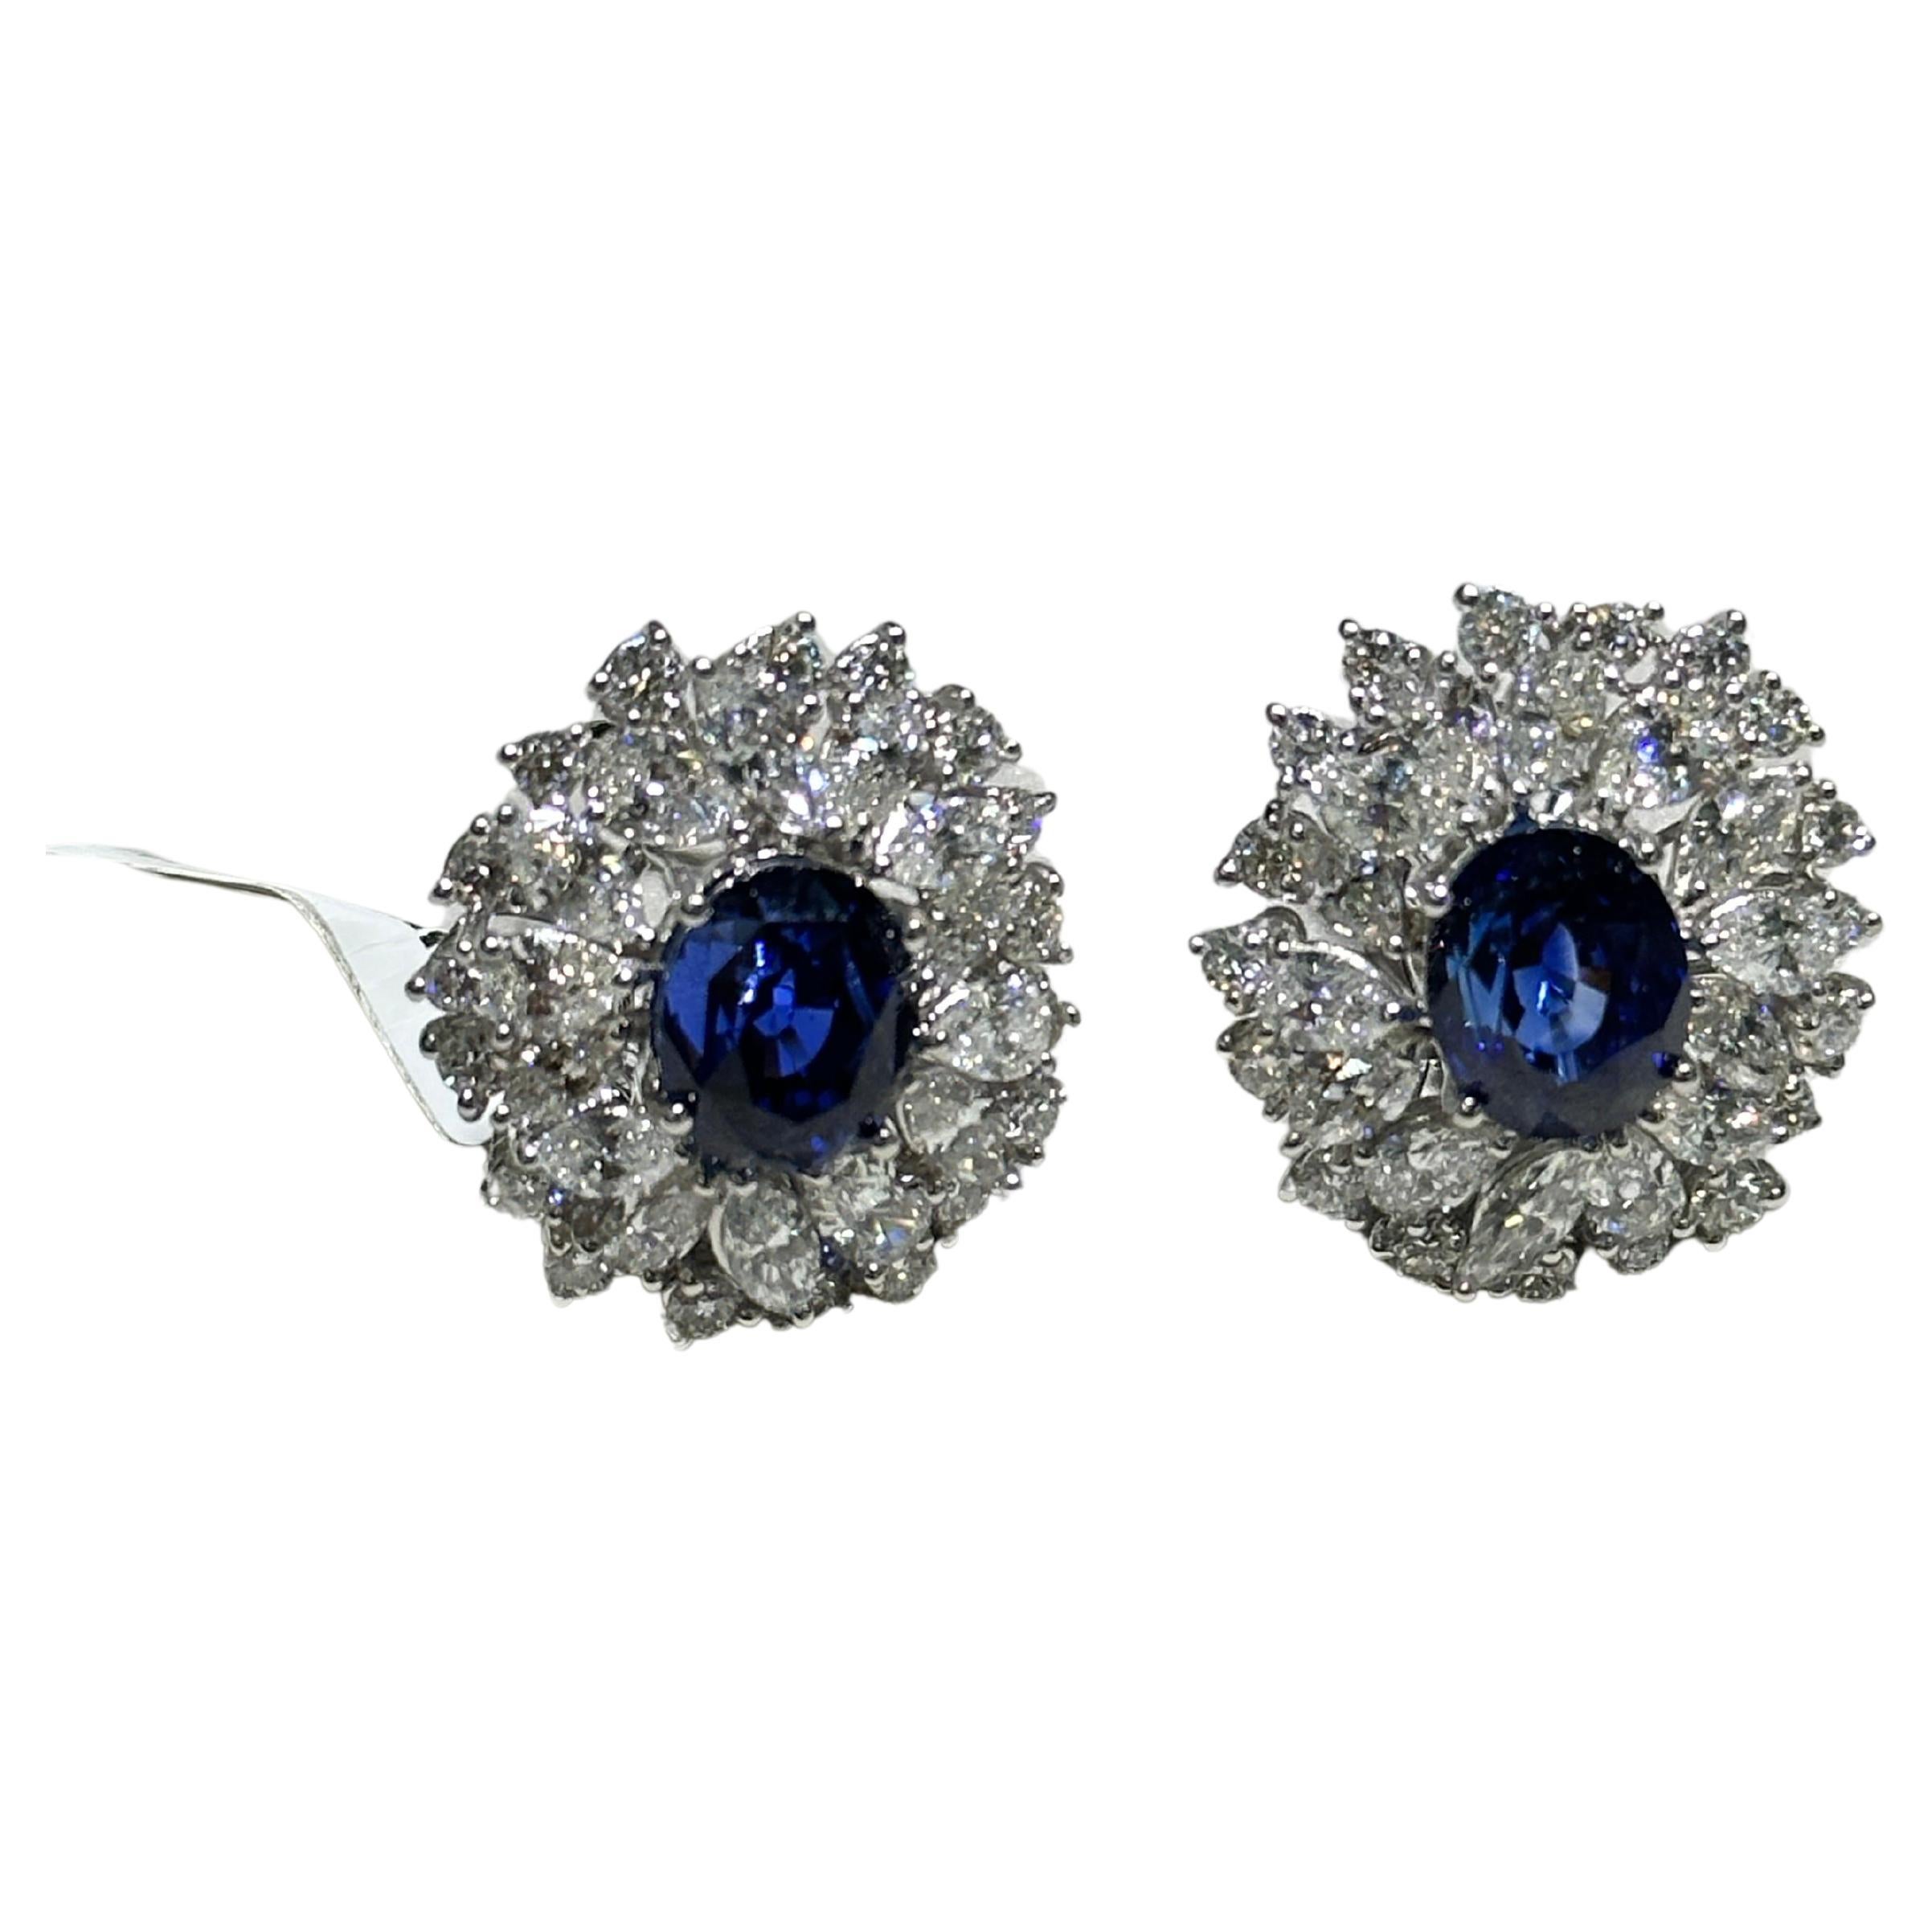 NWT $317, 000 18KT Gold Rare Gorgeous 18CT Blue Sapphire Diamond Earrings For Sale